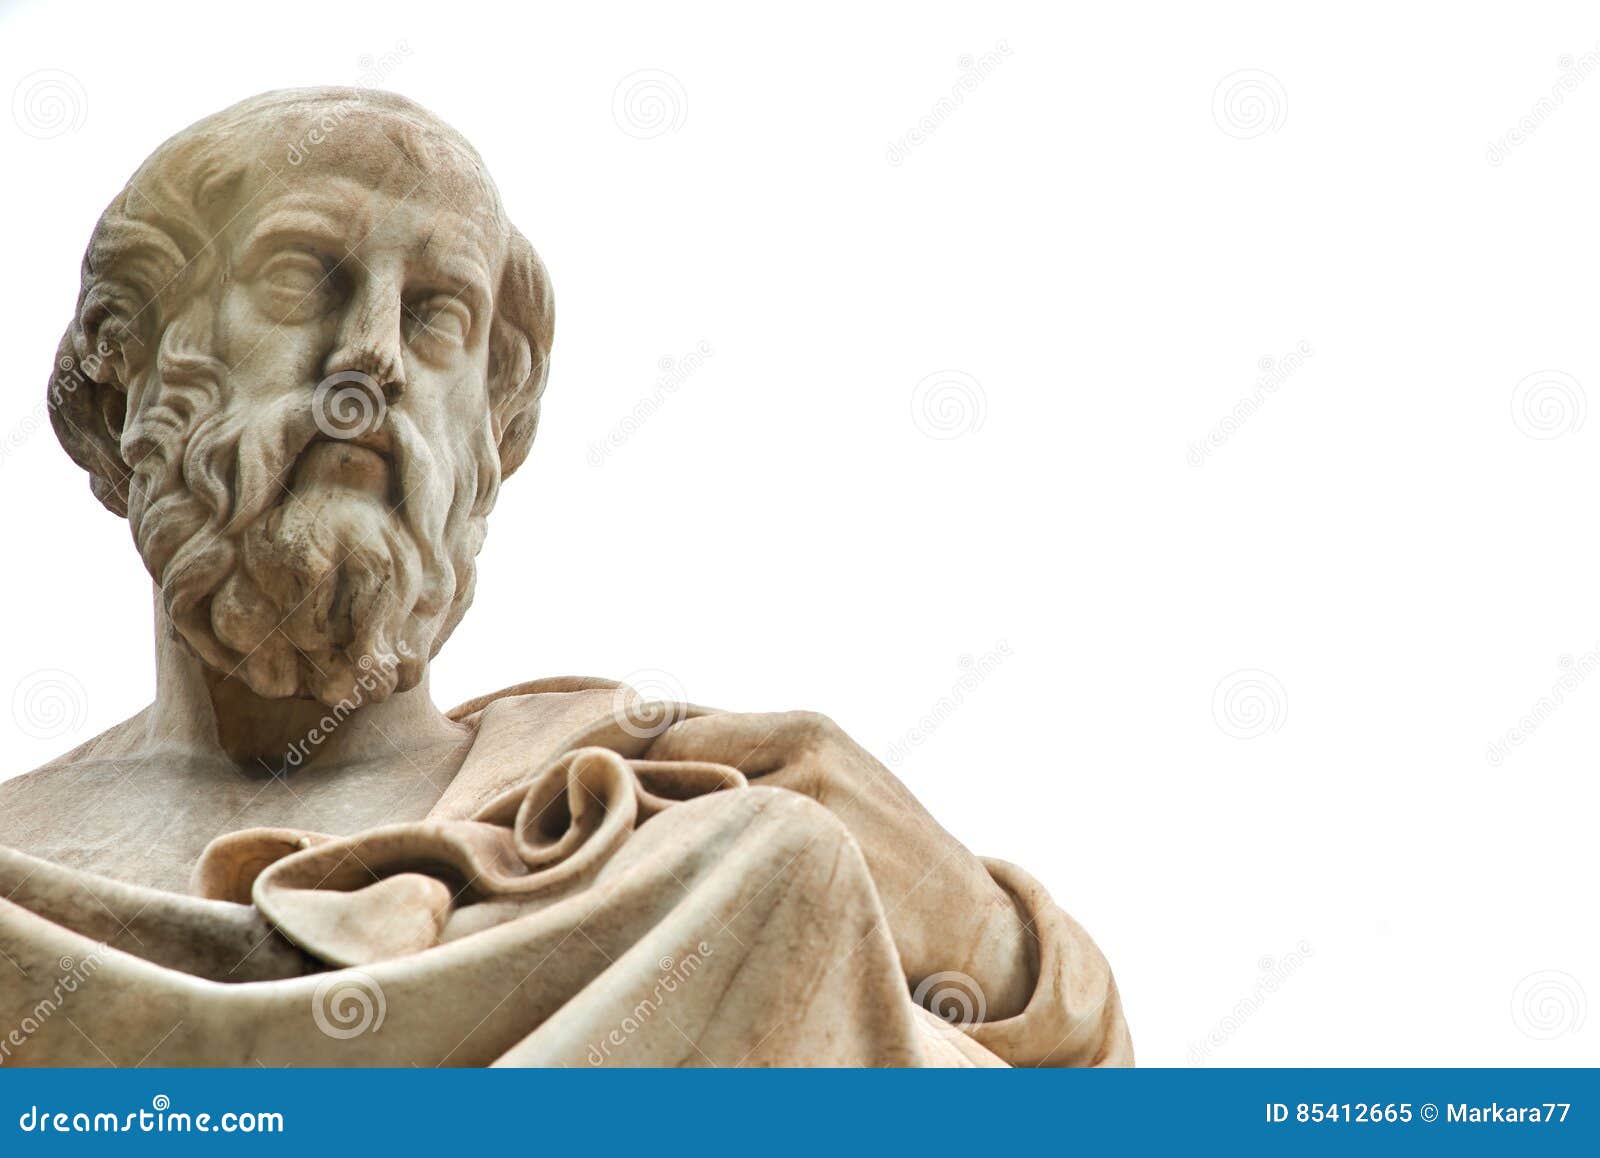 statue of plato in athens.